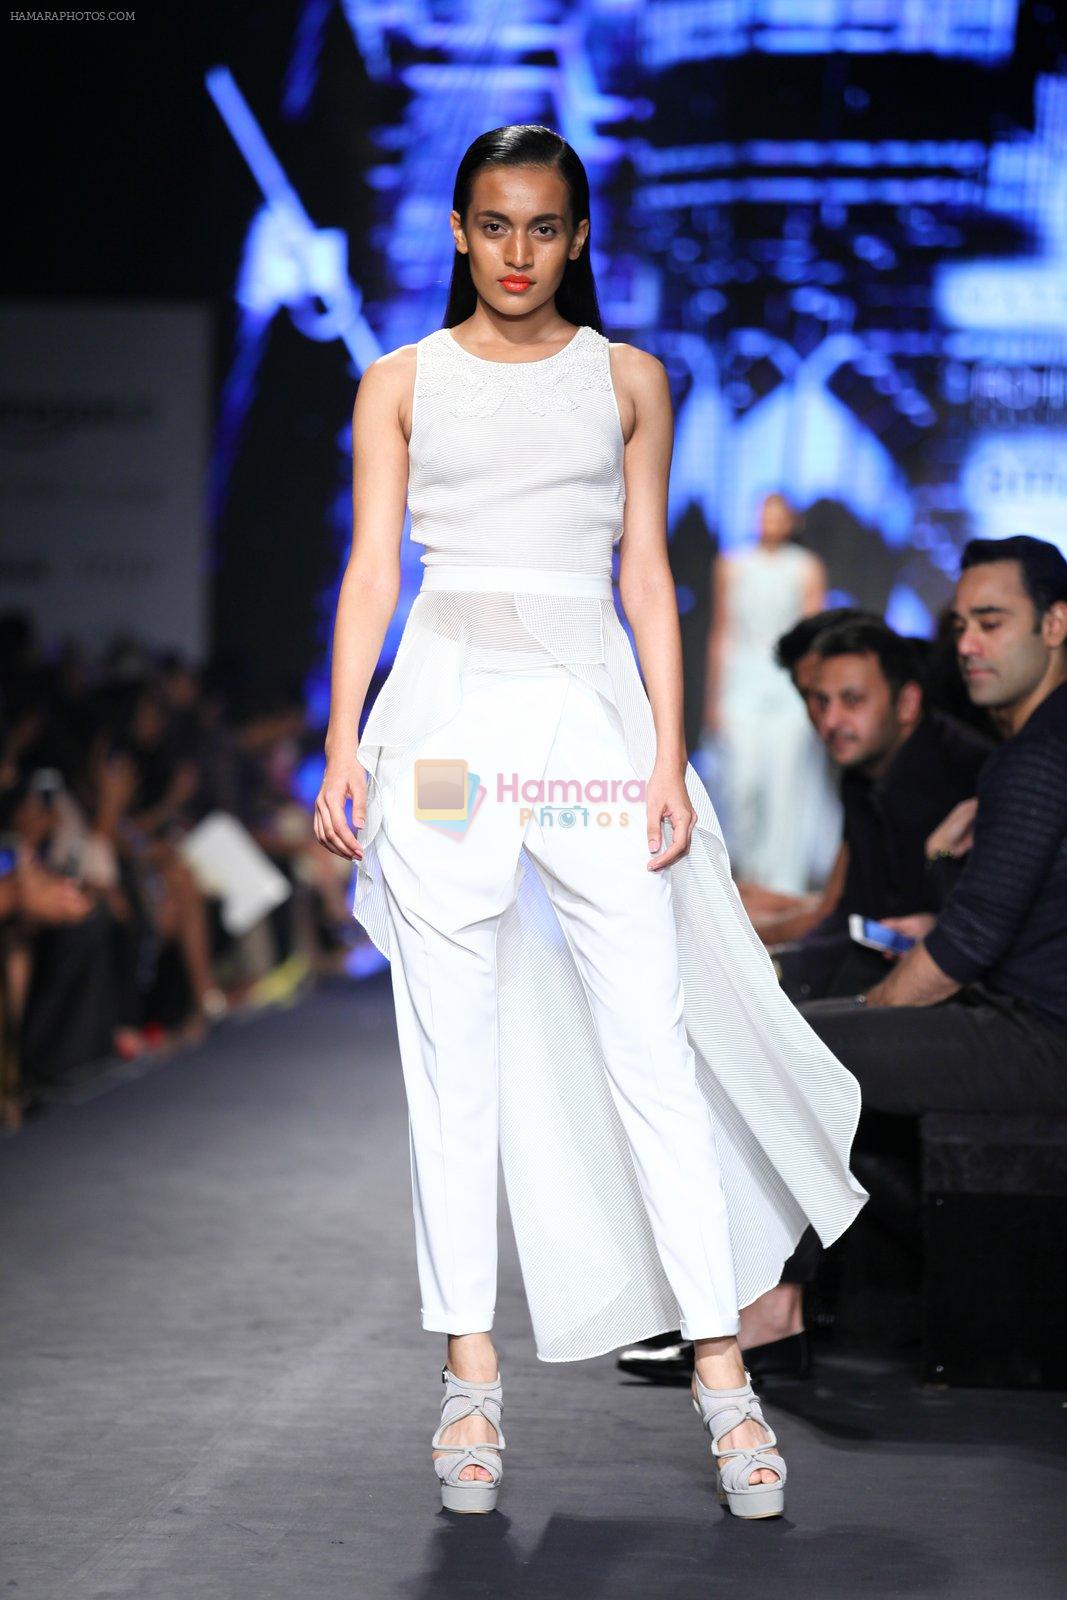 Model walk the ramp for Rohit and Rahul Gandhi Show on Day 4 of Amazon India Fashion Week on 10th Oct 2015